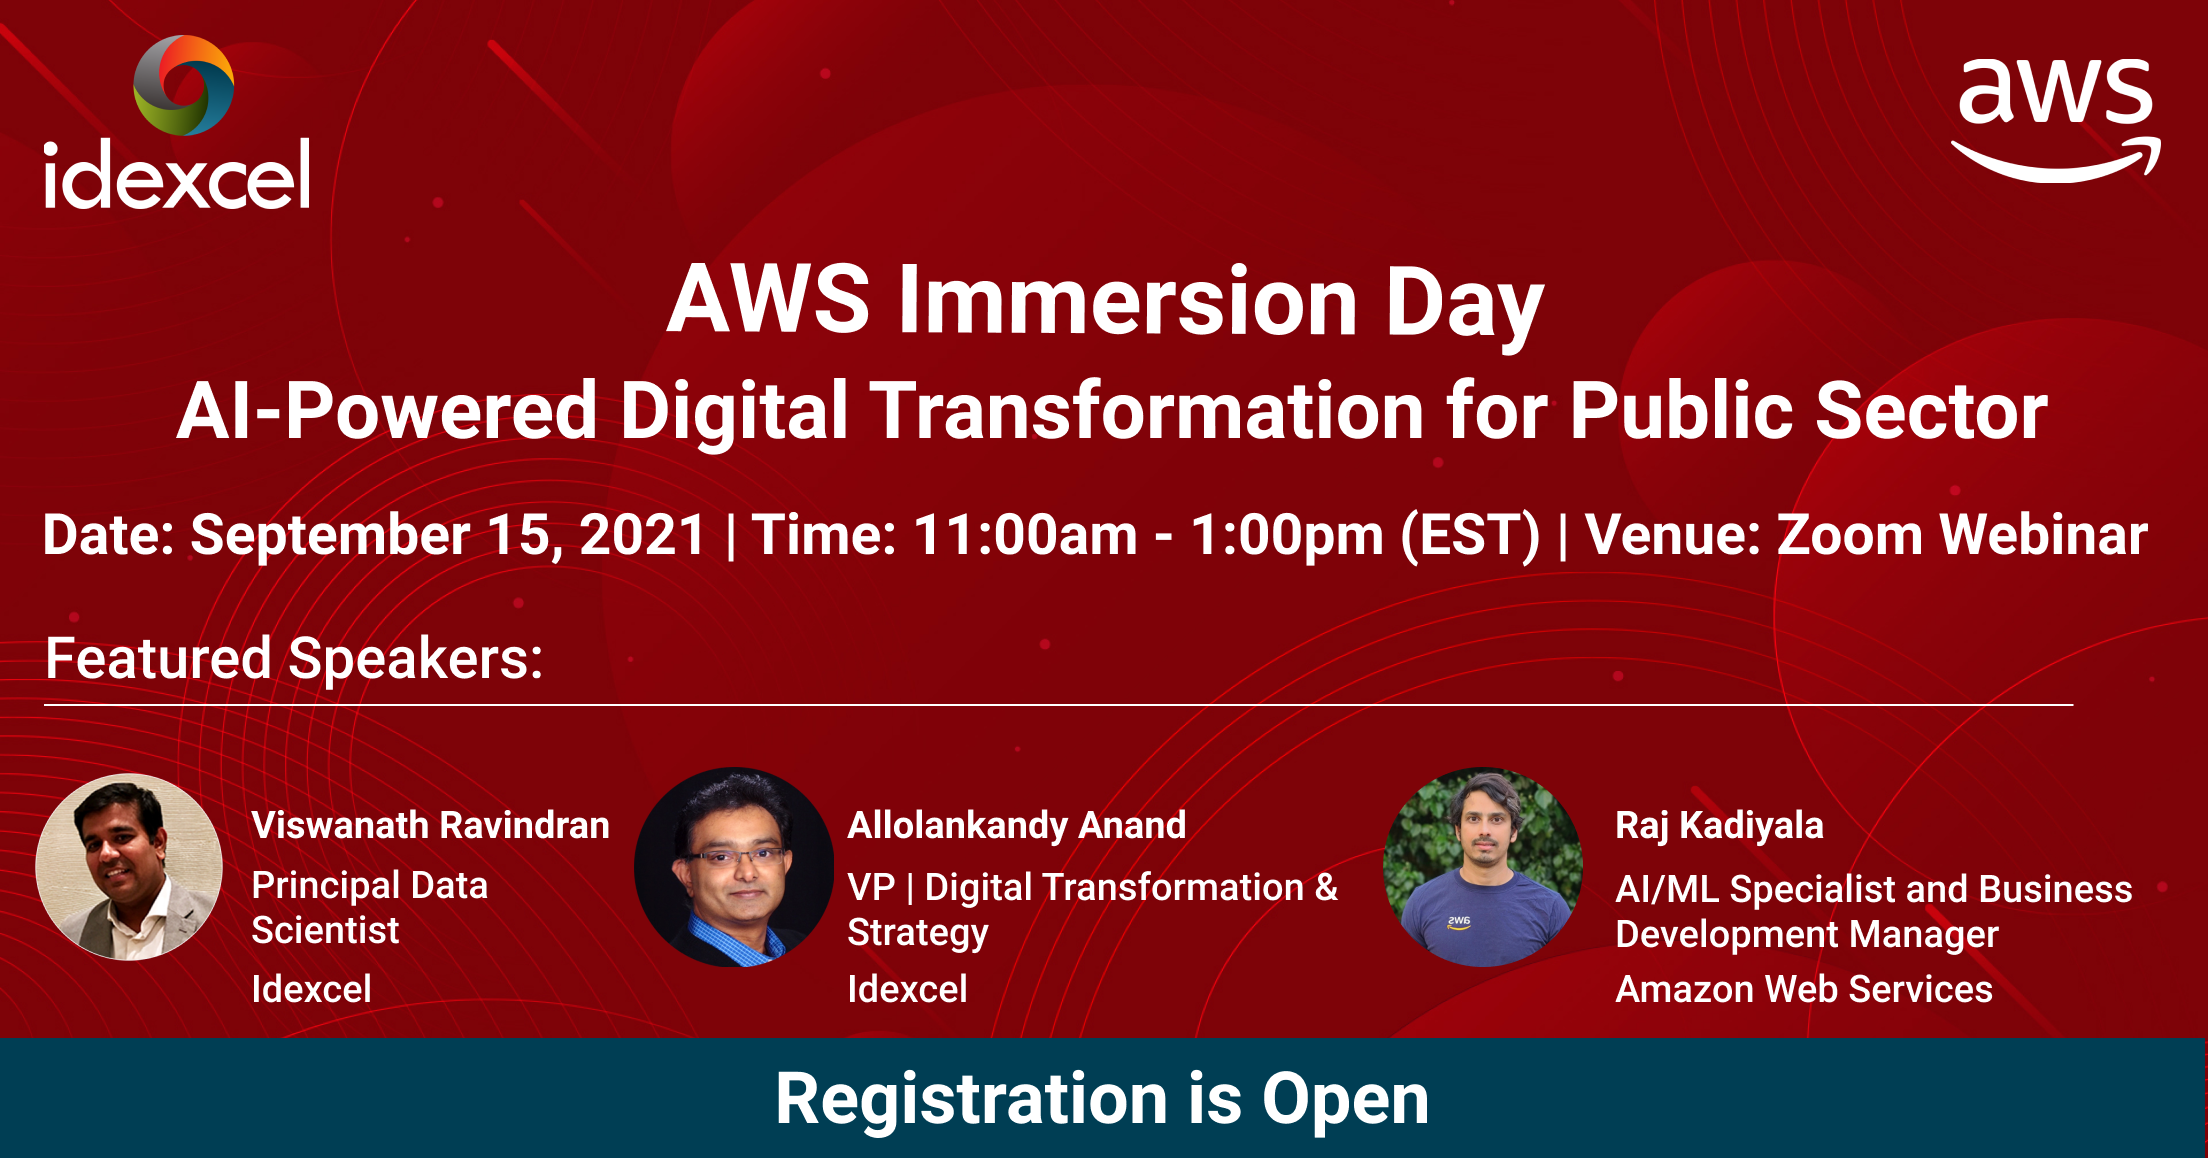 AWS Immersion Day: AI-Powered Digital Transformation for Public Sector